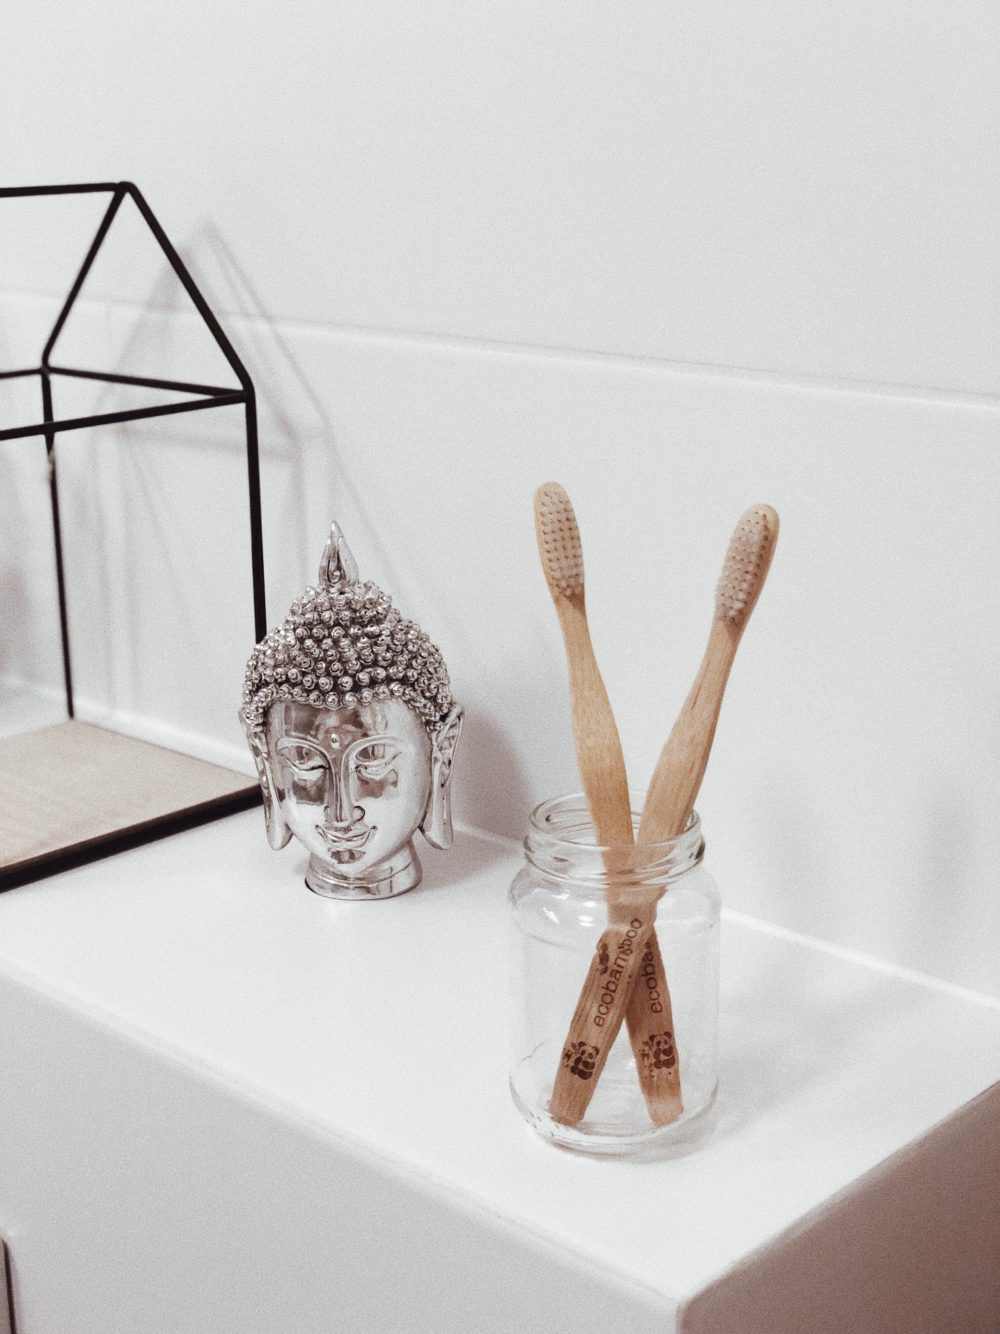 https://mindfulofthehome.com/wp-content/uploads/2021/02/bamboo-toothbrush-in-glass-jar-1000x1334.jpg